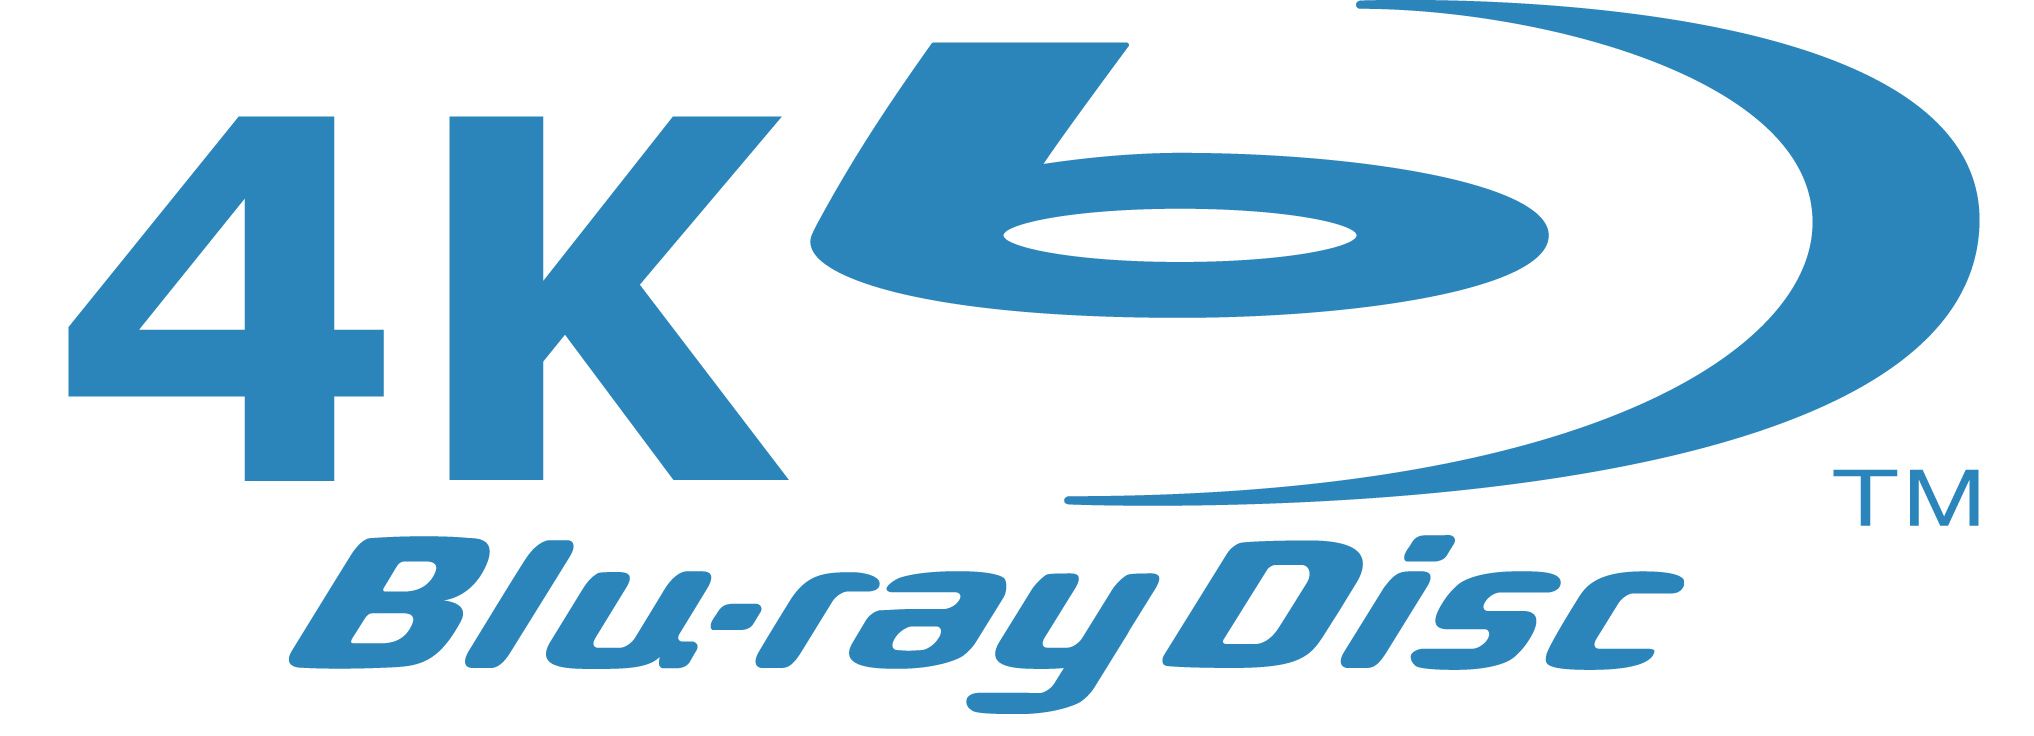 4k blu ray discs confirmed by the blu ray disc association image 1